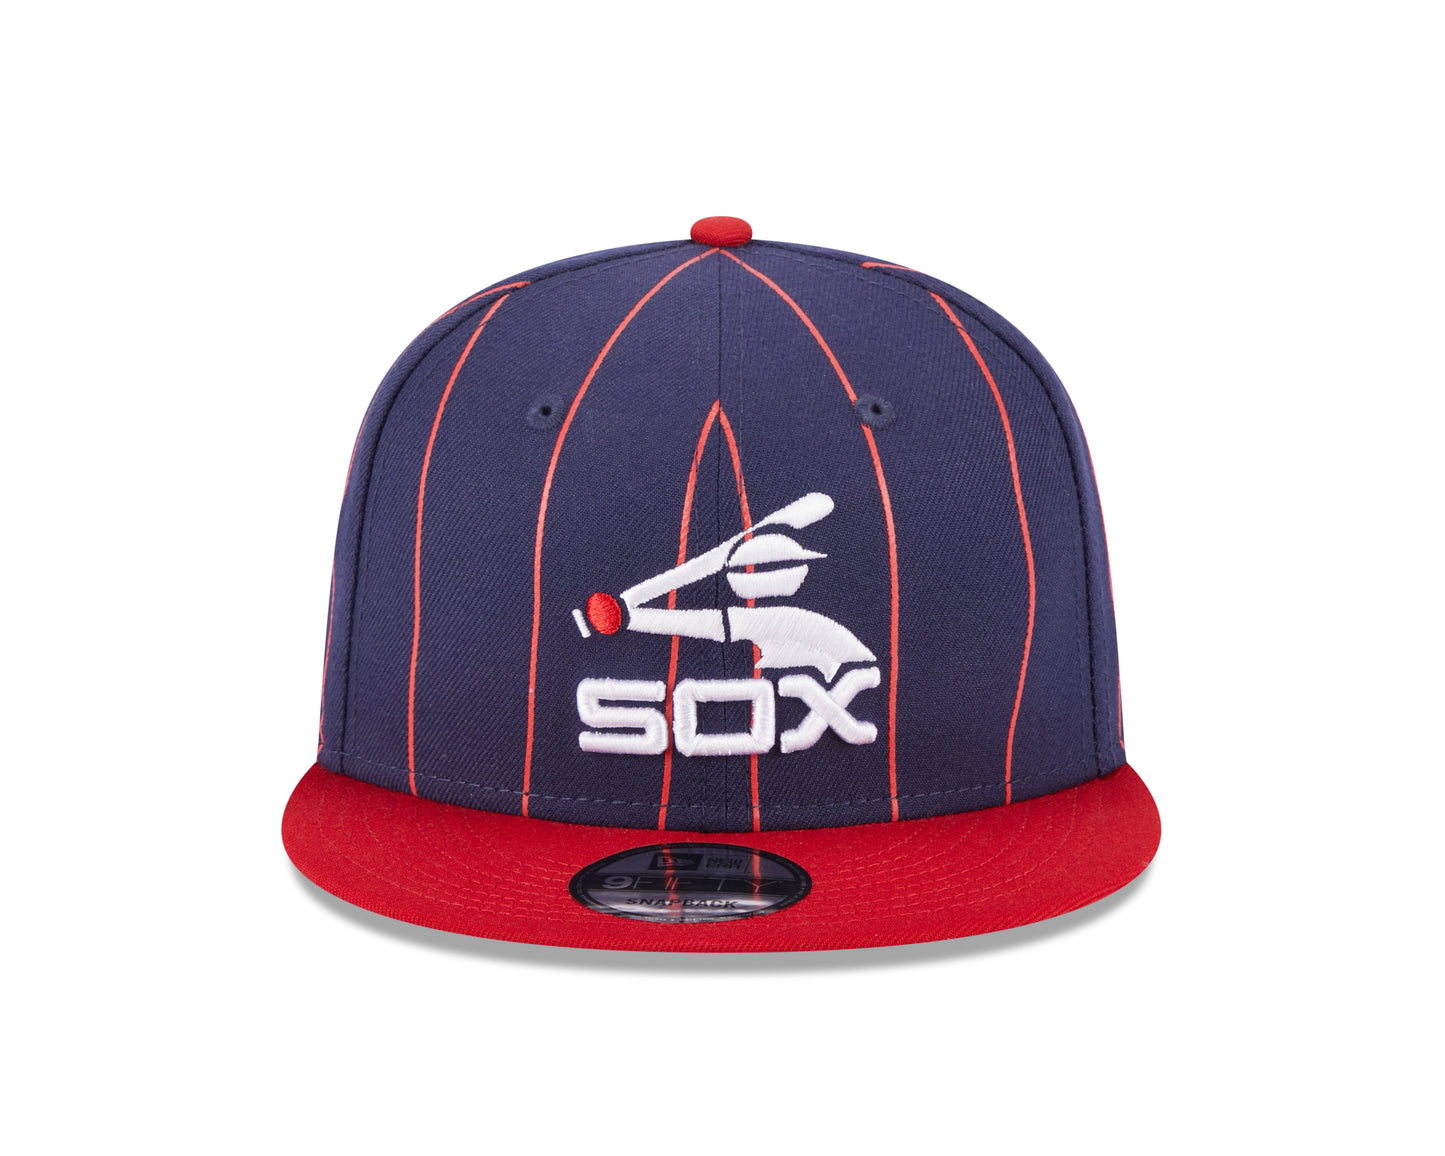 Chicago White Sox Cooperstown Navy/Red Vintage New Era 9FIFTY Snapback Hat